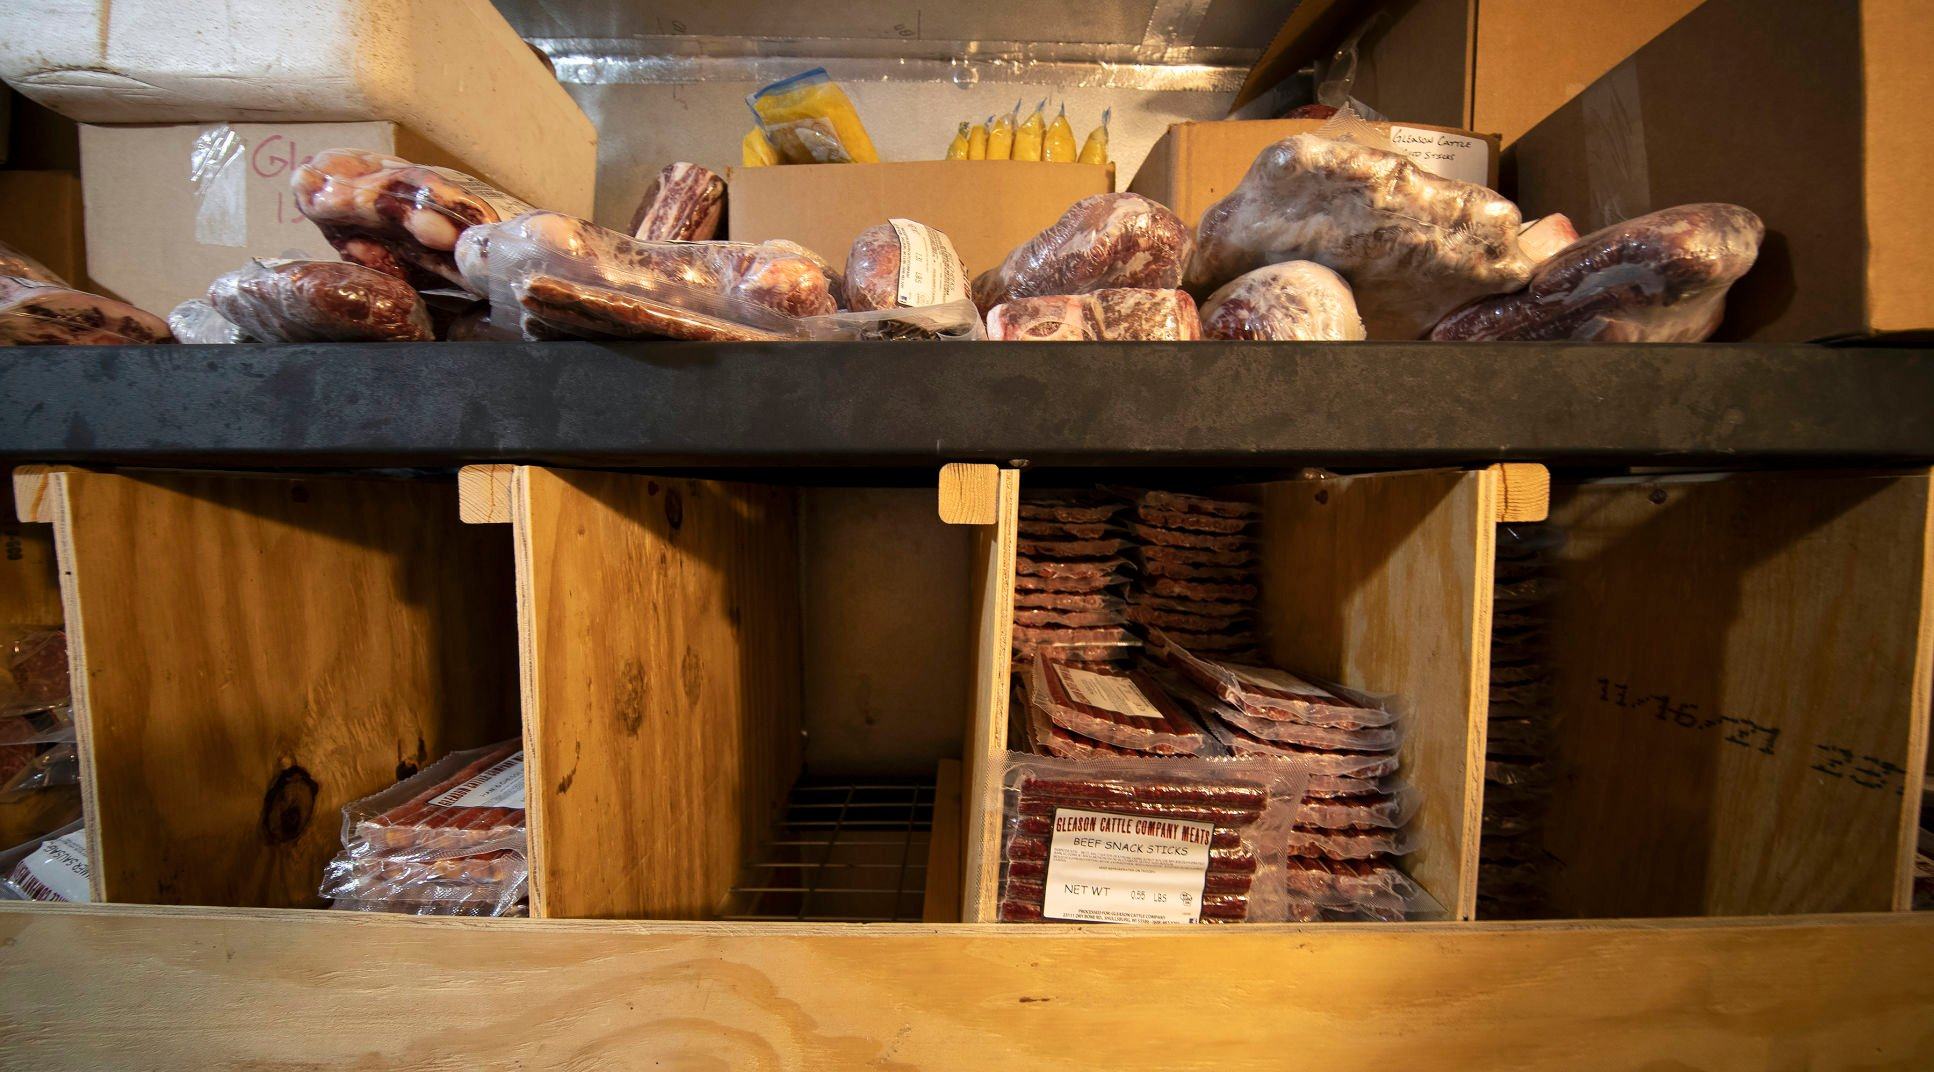 A walk-in cooler stocked with meat from the Gleason